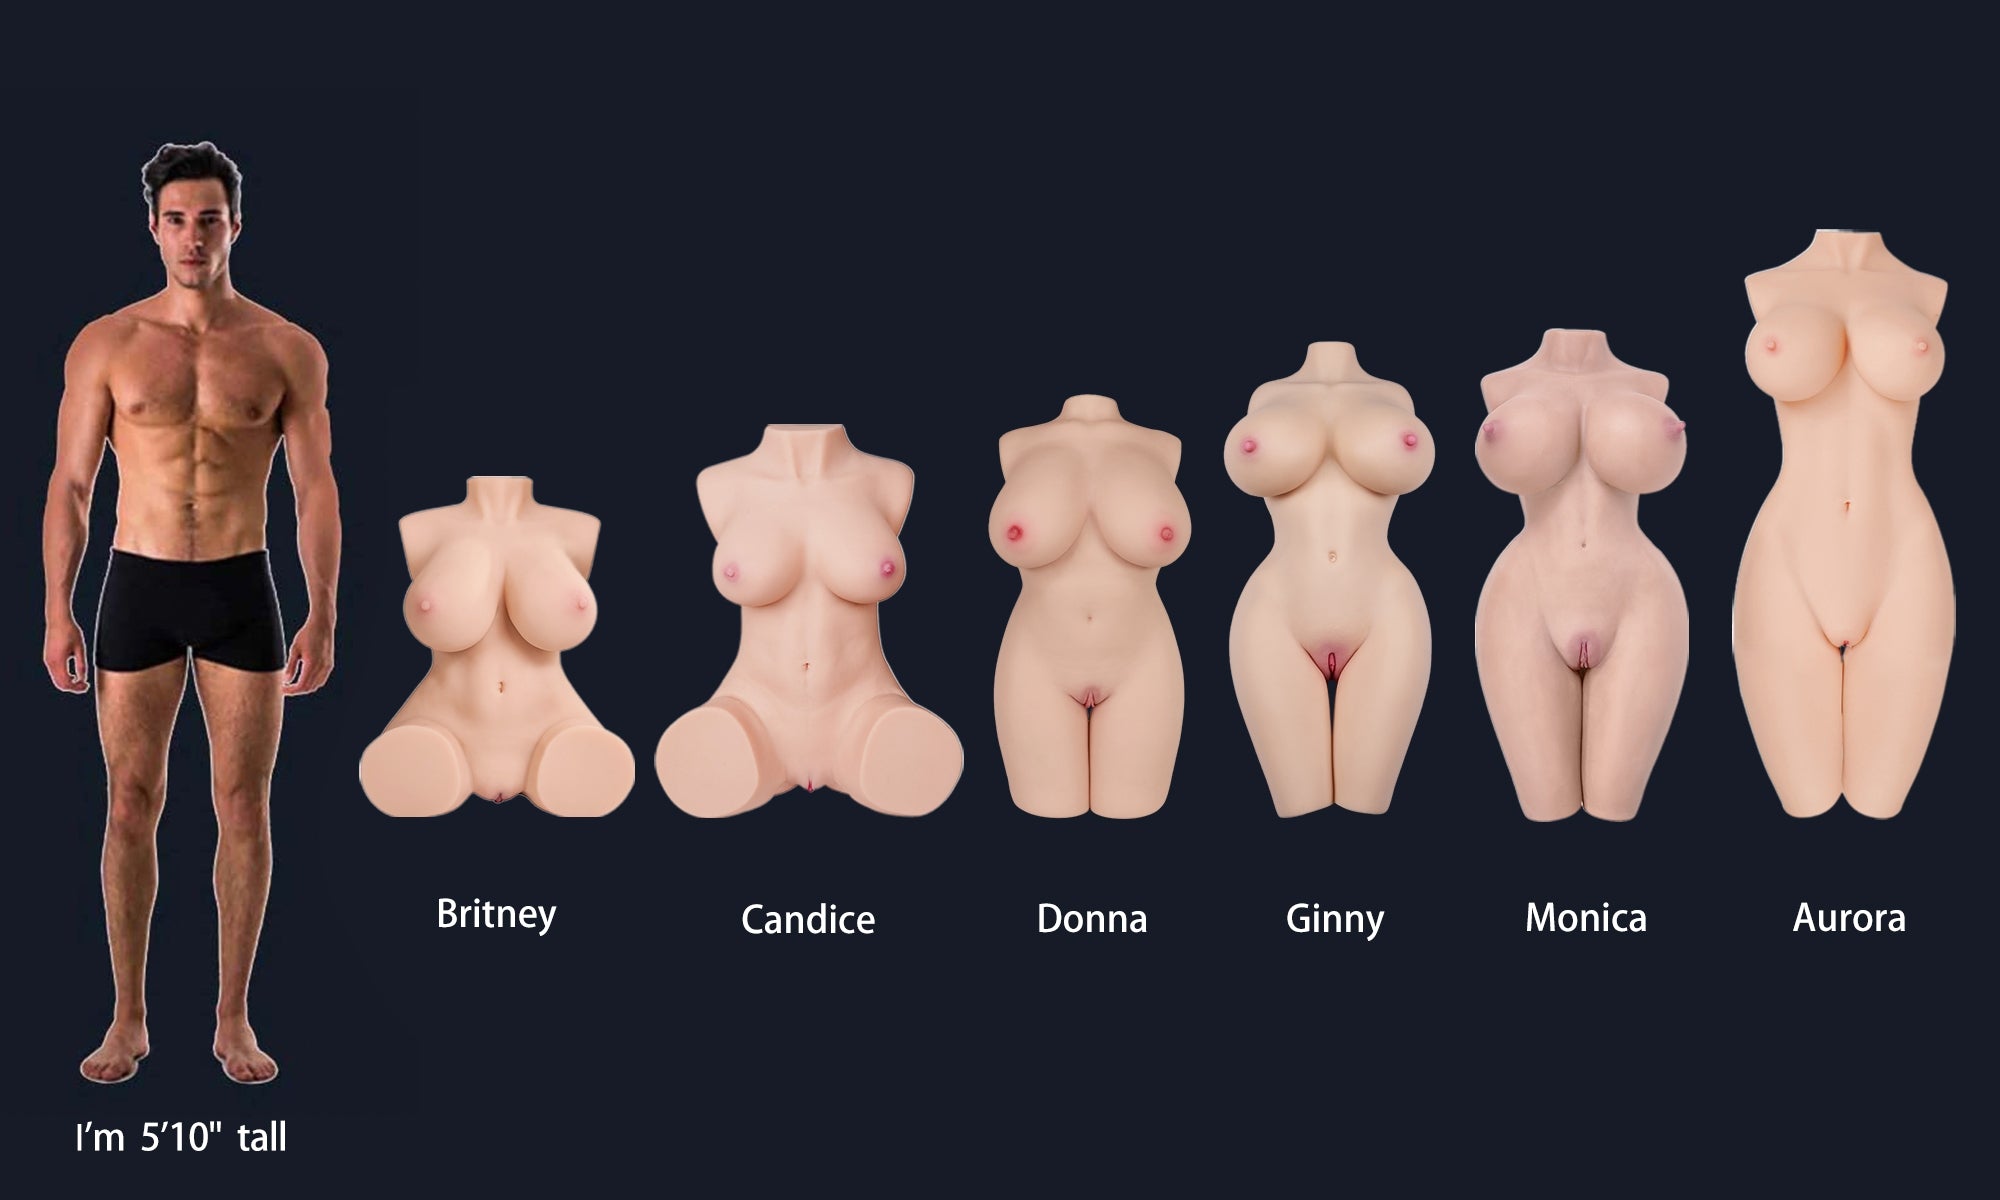 britney doll comparison with  other hot dolls.jpeg__PID:a75c7cb6-6760-4e98-85d3-f84c02cc7bca